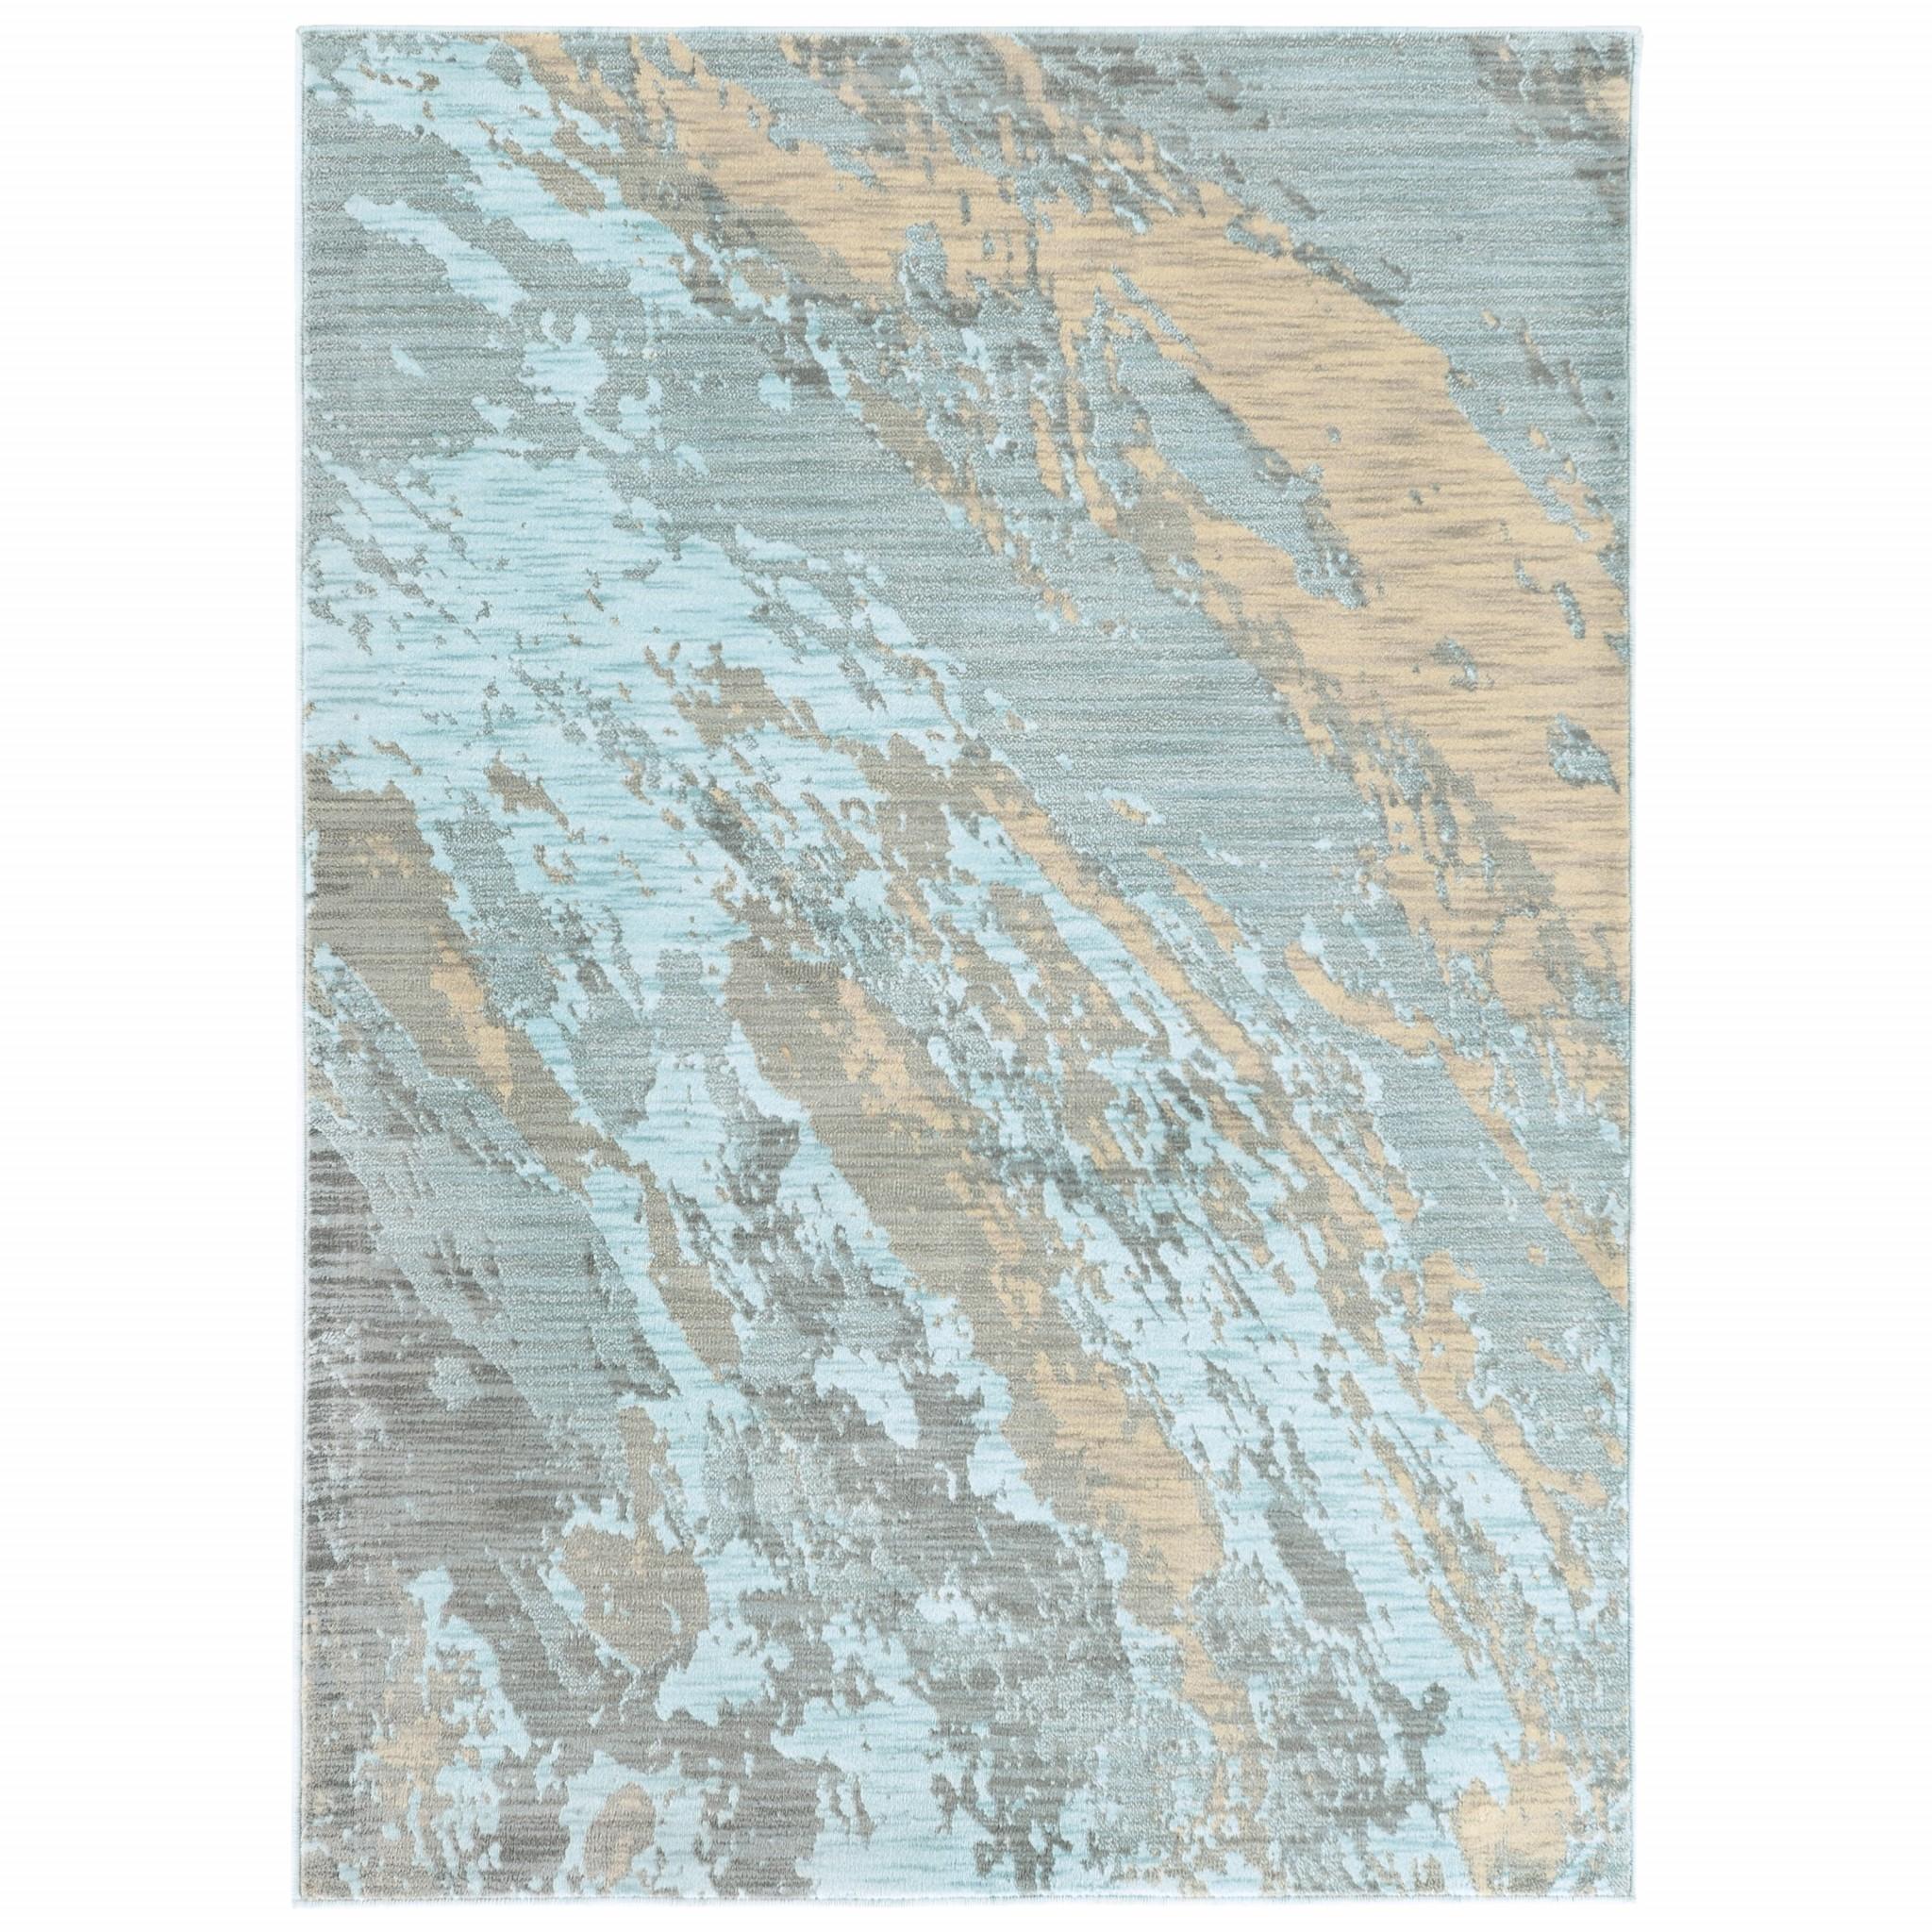 10’x13’ Blue and Gray Abstract Impasto Area Rug Default Title